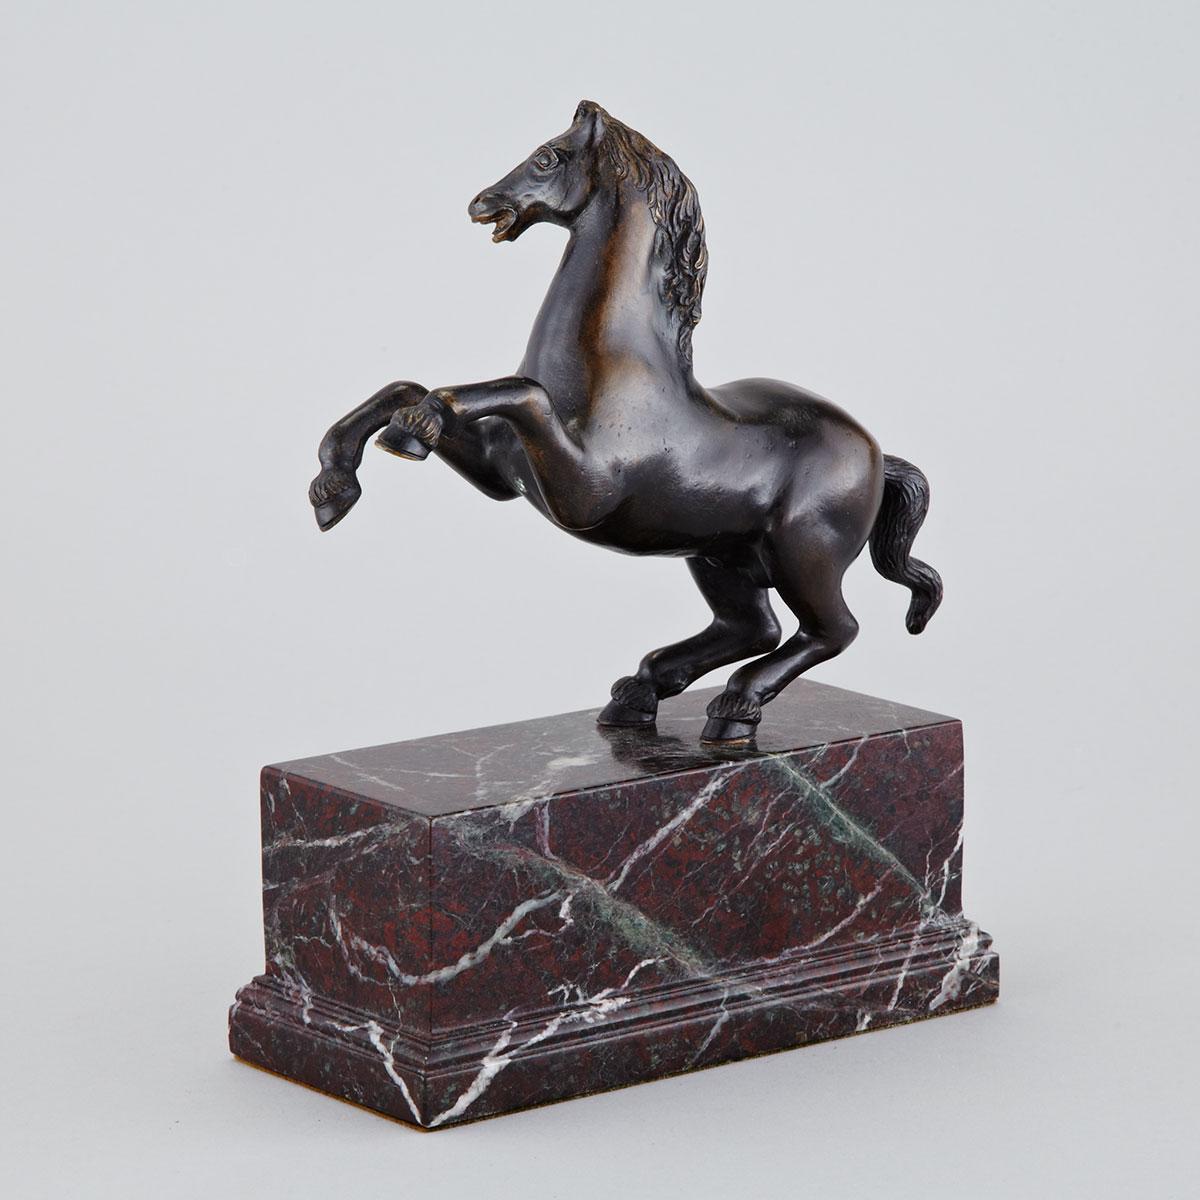 Italian Patinated Bronze Model of a Rearing Horse, 19th century